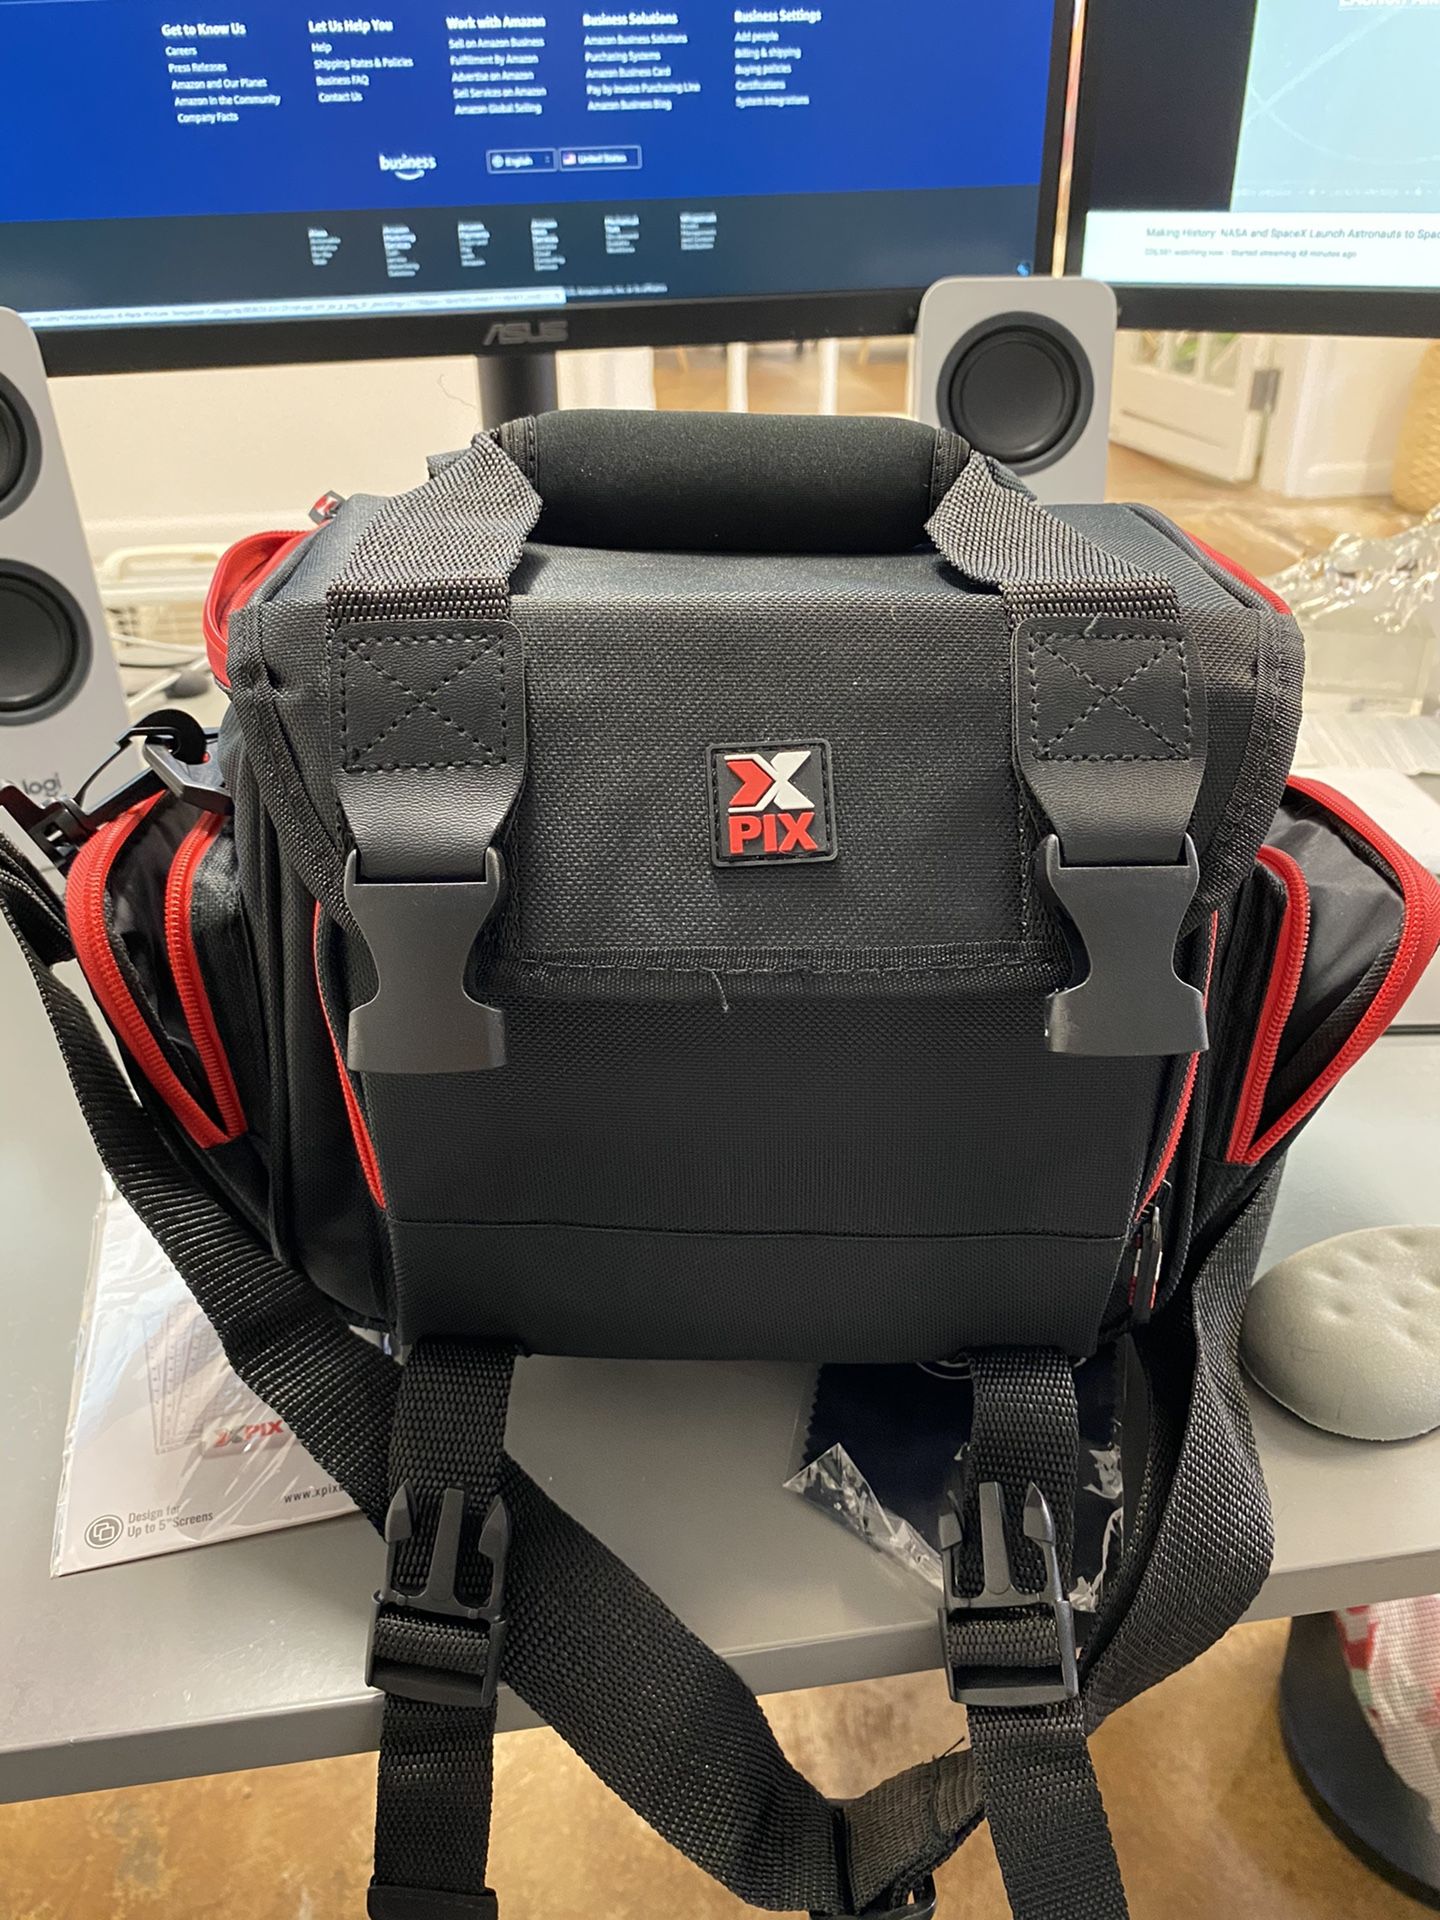 Brand NEW Adjustable Camera Bag with Cleaning Tools